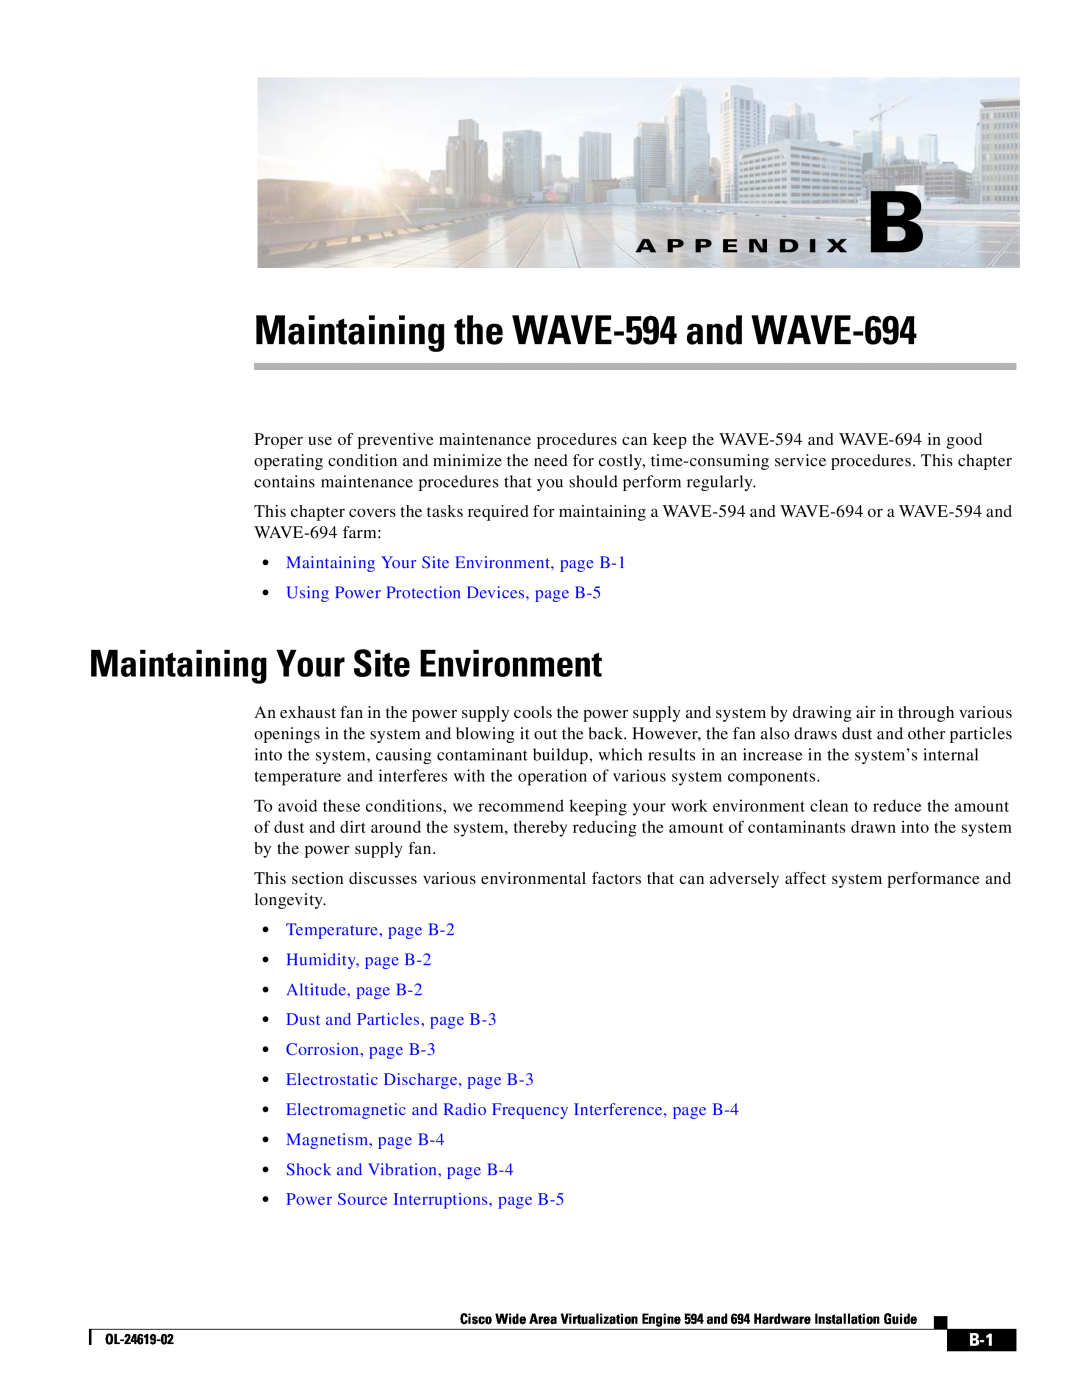 Cisco Systems WAVE594K9 Maintaining the WAVE-594 and WAVE-694, Maintaining Your Site Environment, A P P E N D I X B 